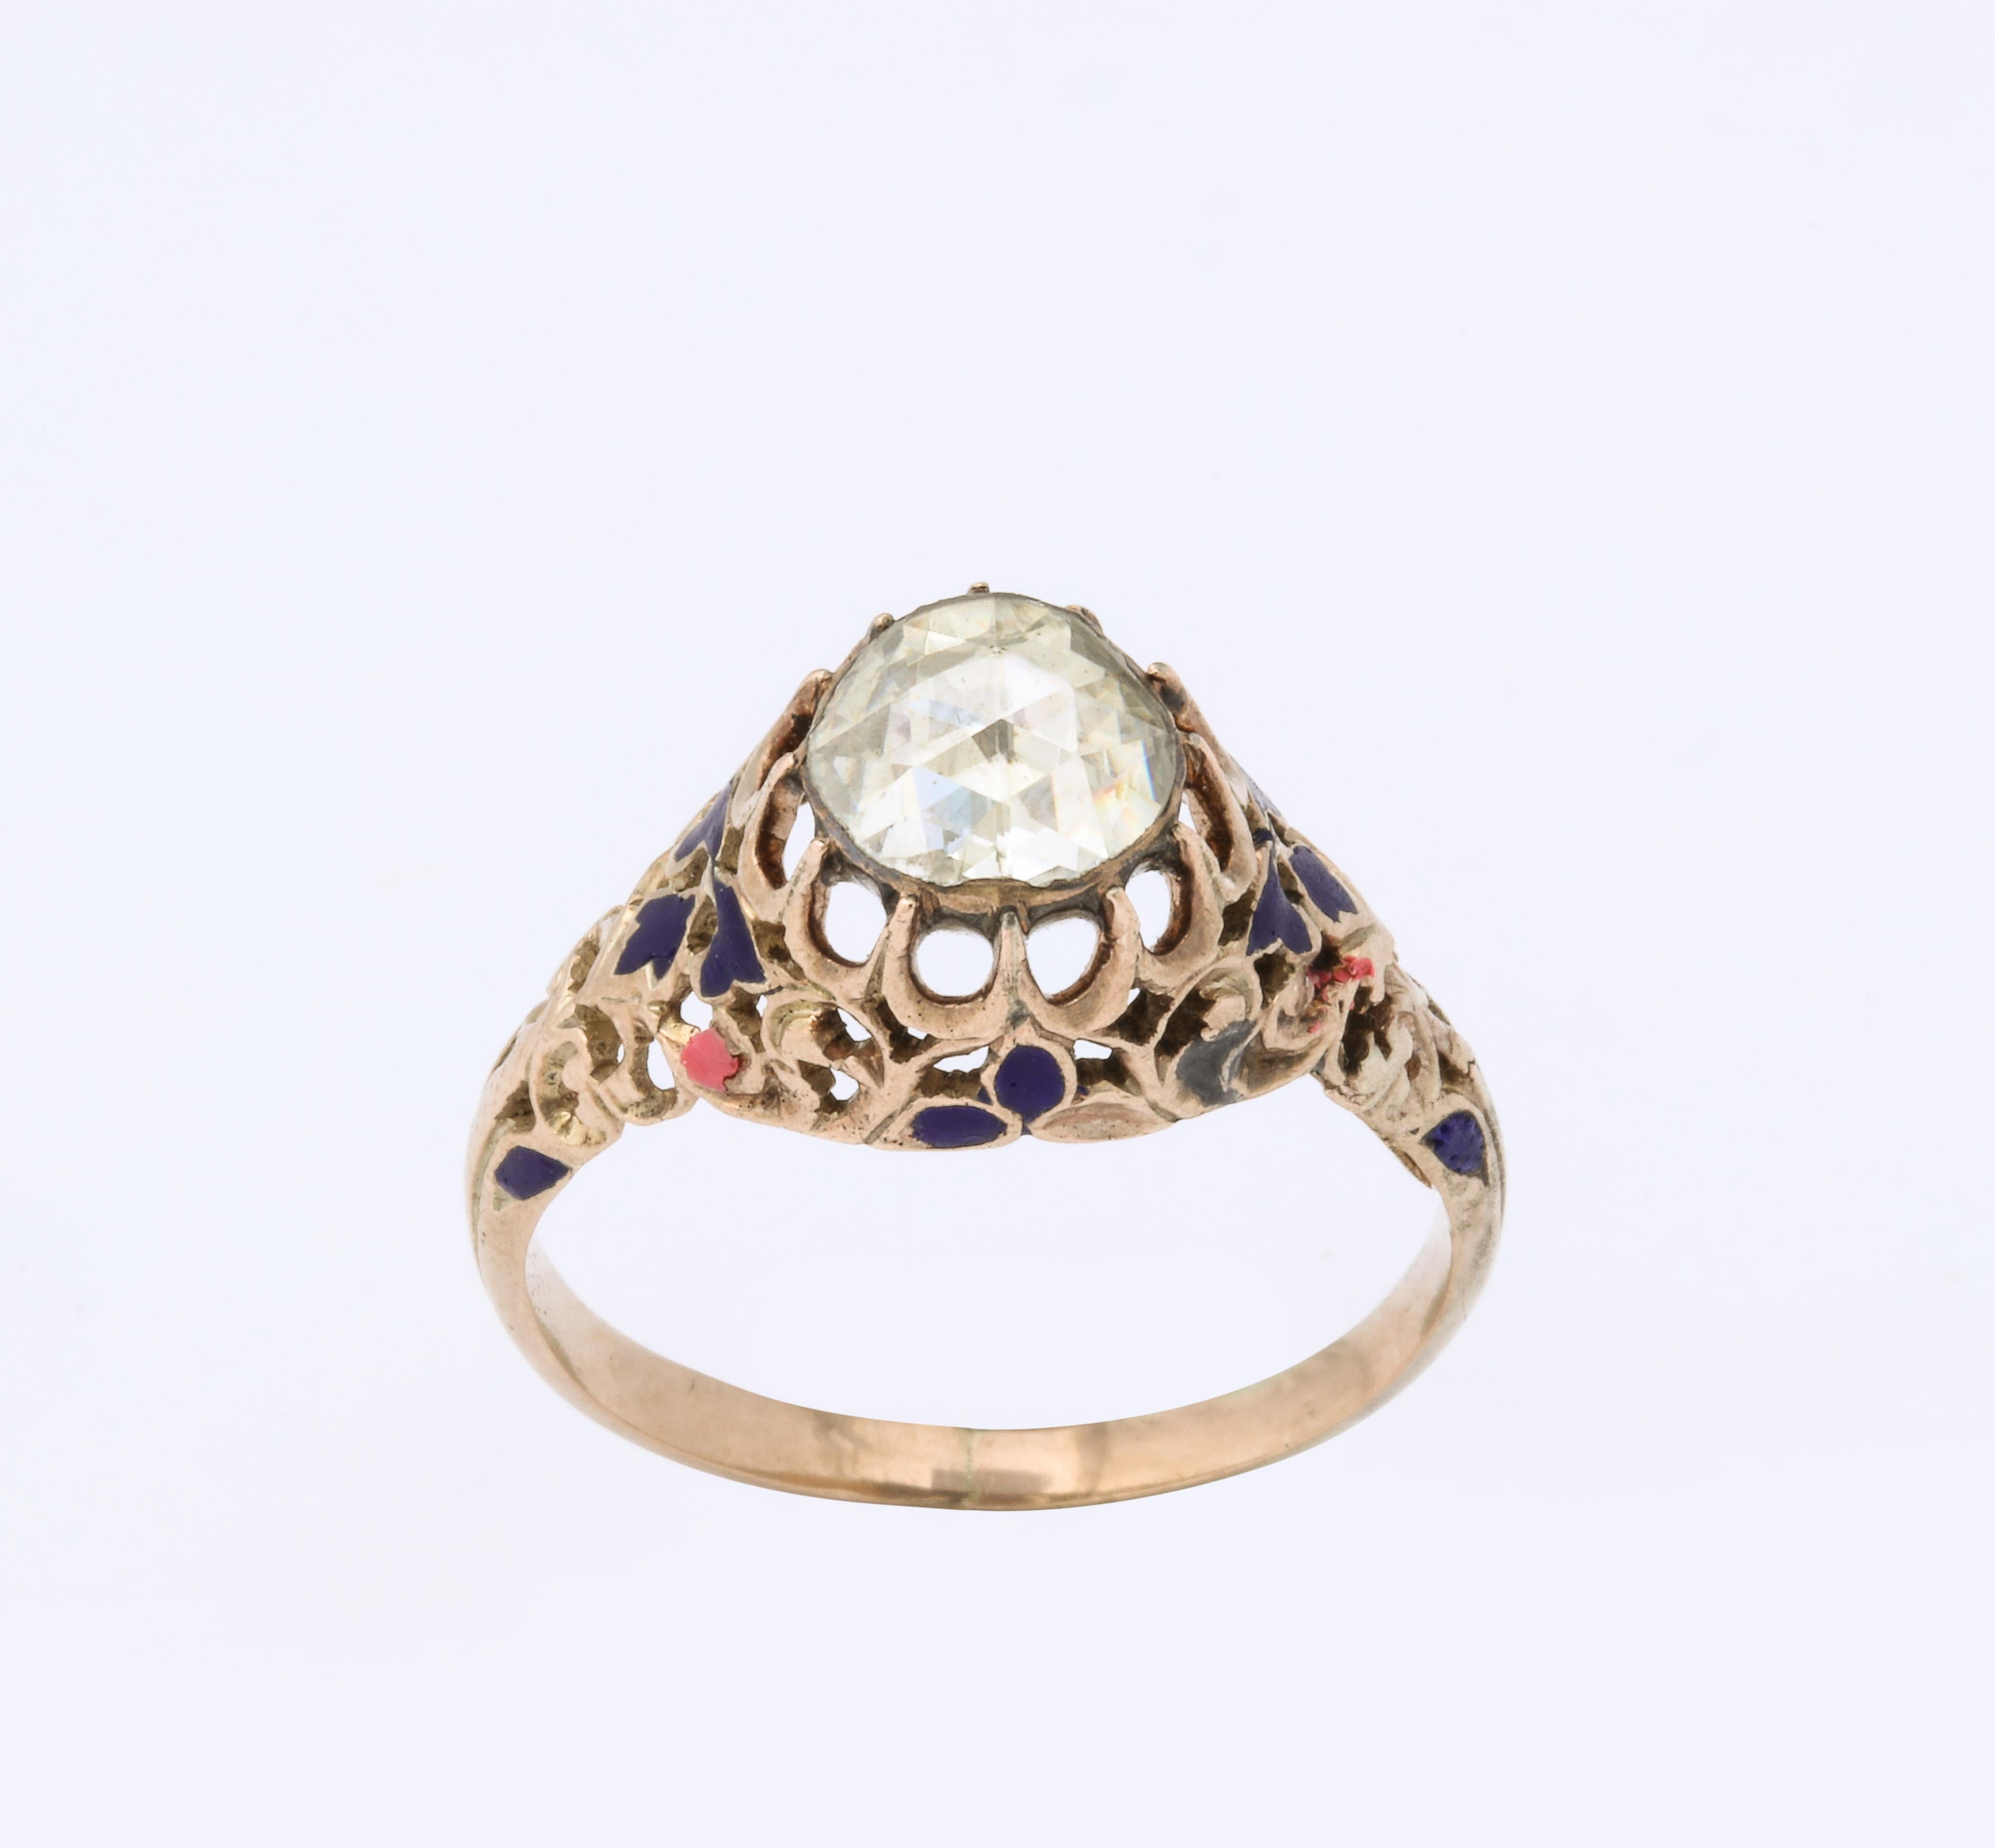 Antique Rose Diamond and Enamel Gold Ring. An exceptional quality rose diamond small loss to the enamel. 0.65 Carat

